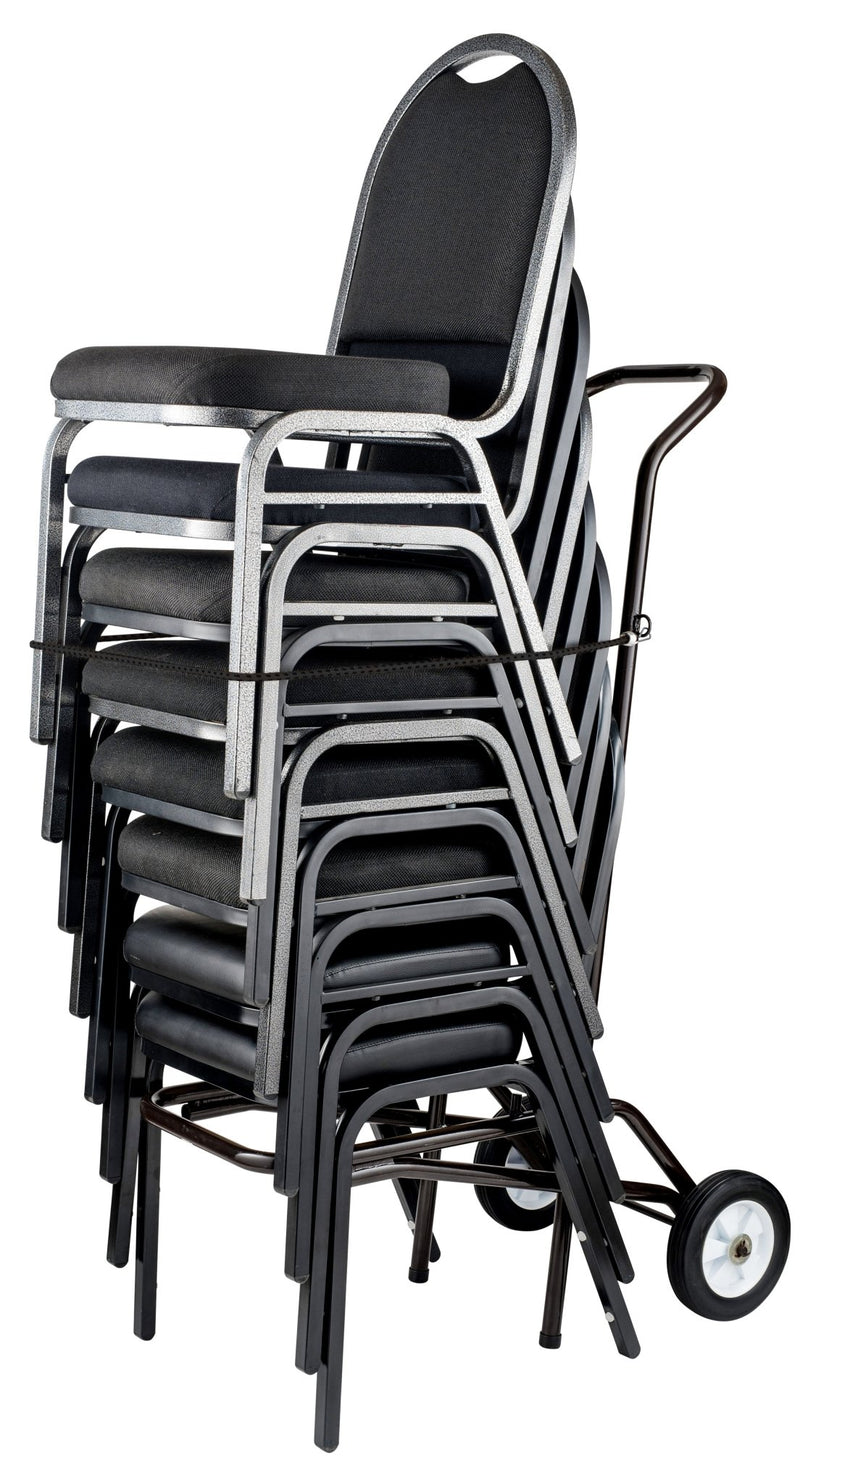 NPS Dolly For 9000 Series Stack Chair Truck (National Public Seating NPS-DY-9000) - SchoolOutlet